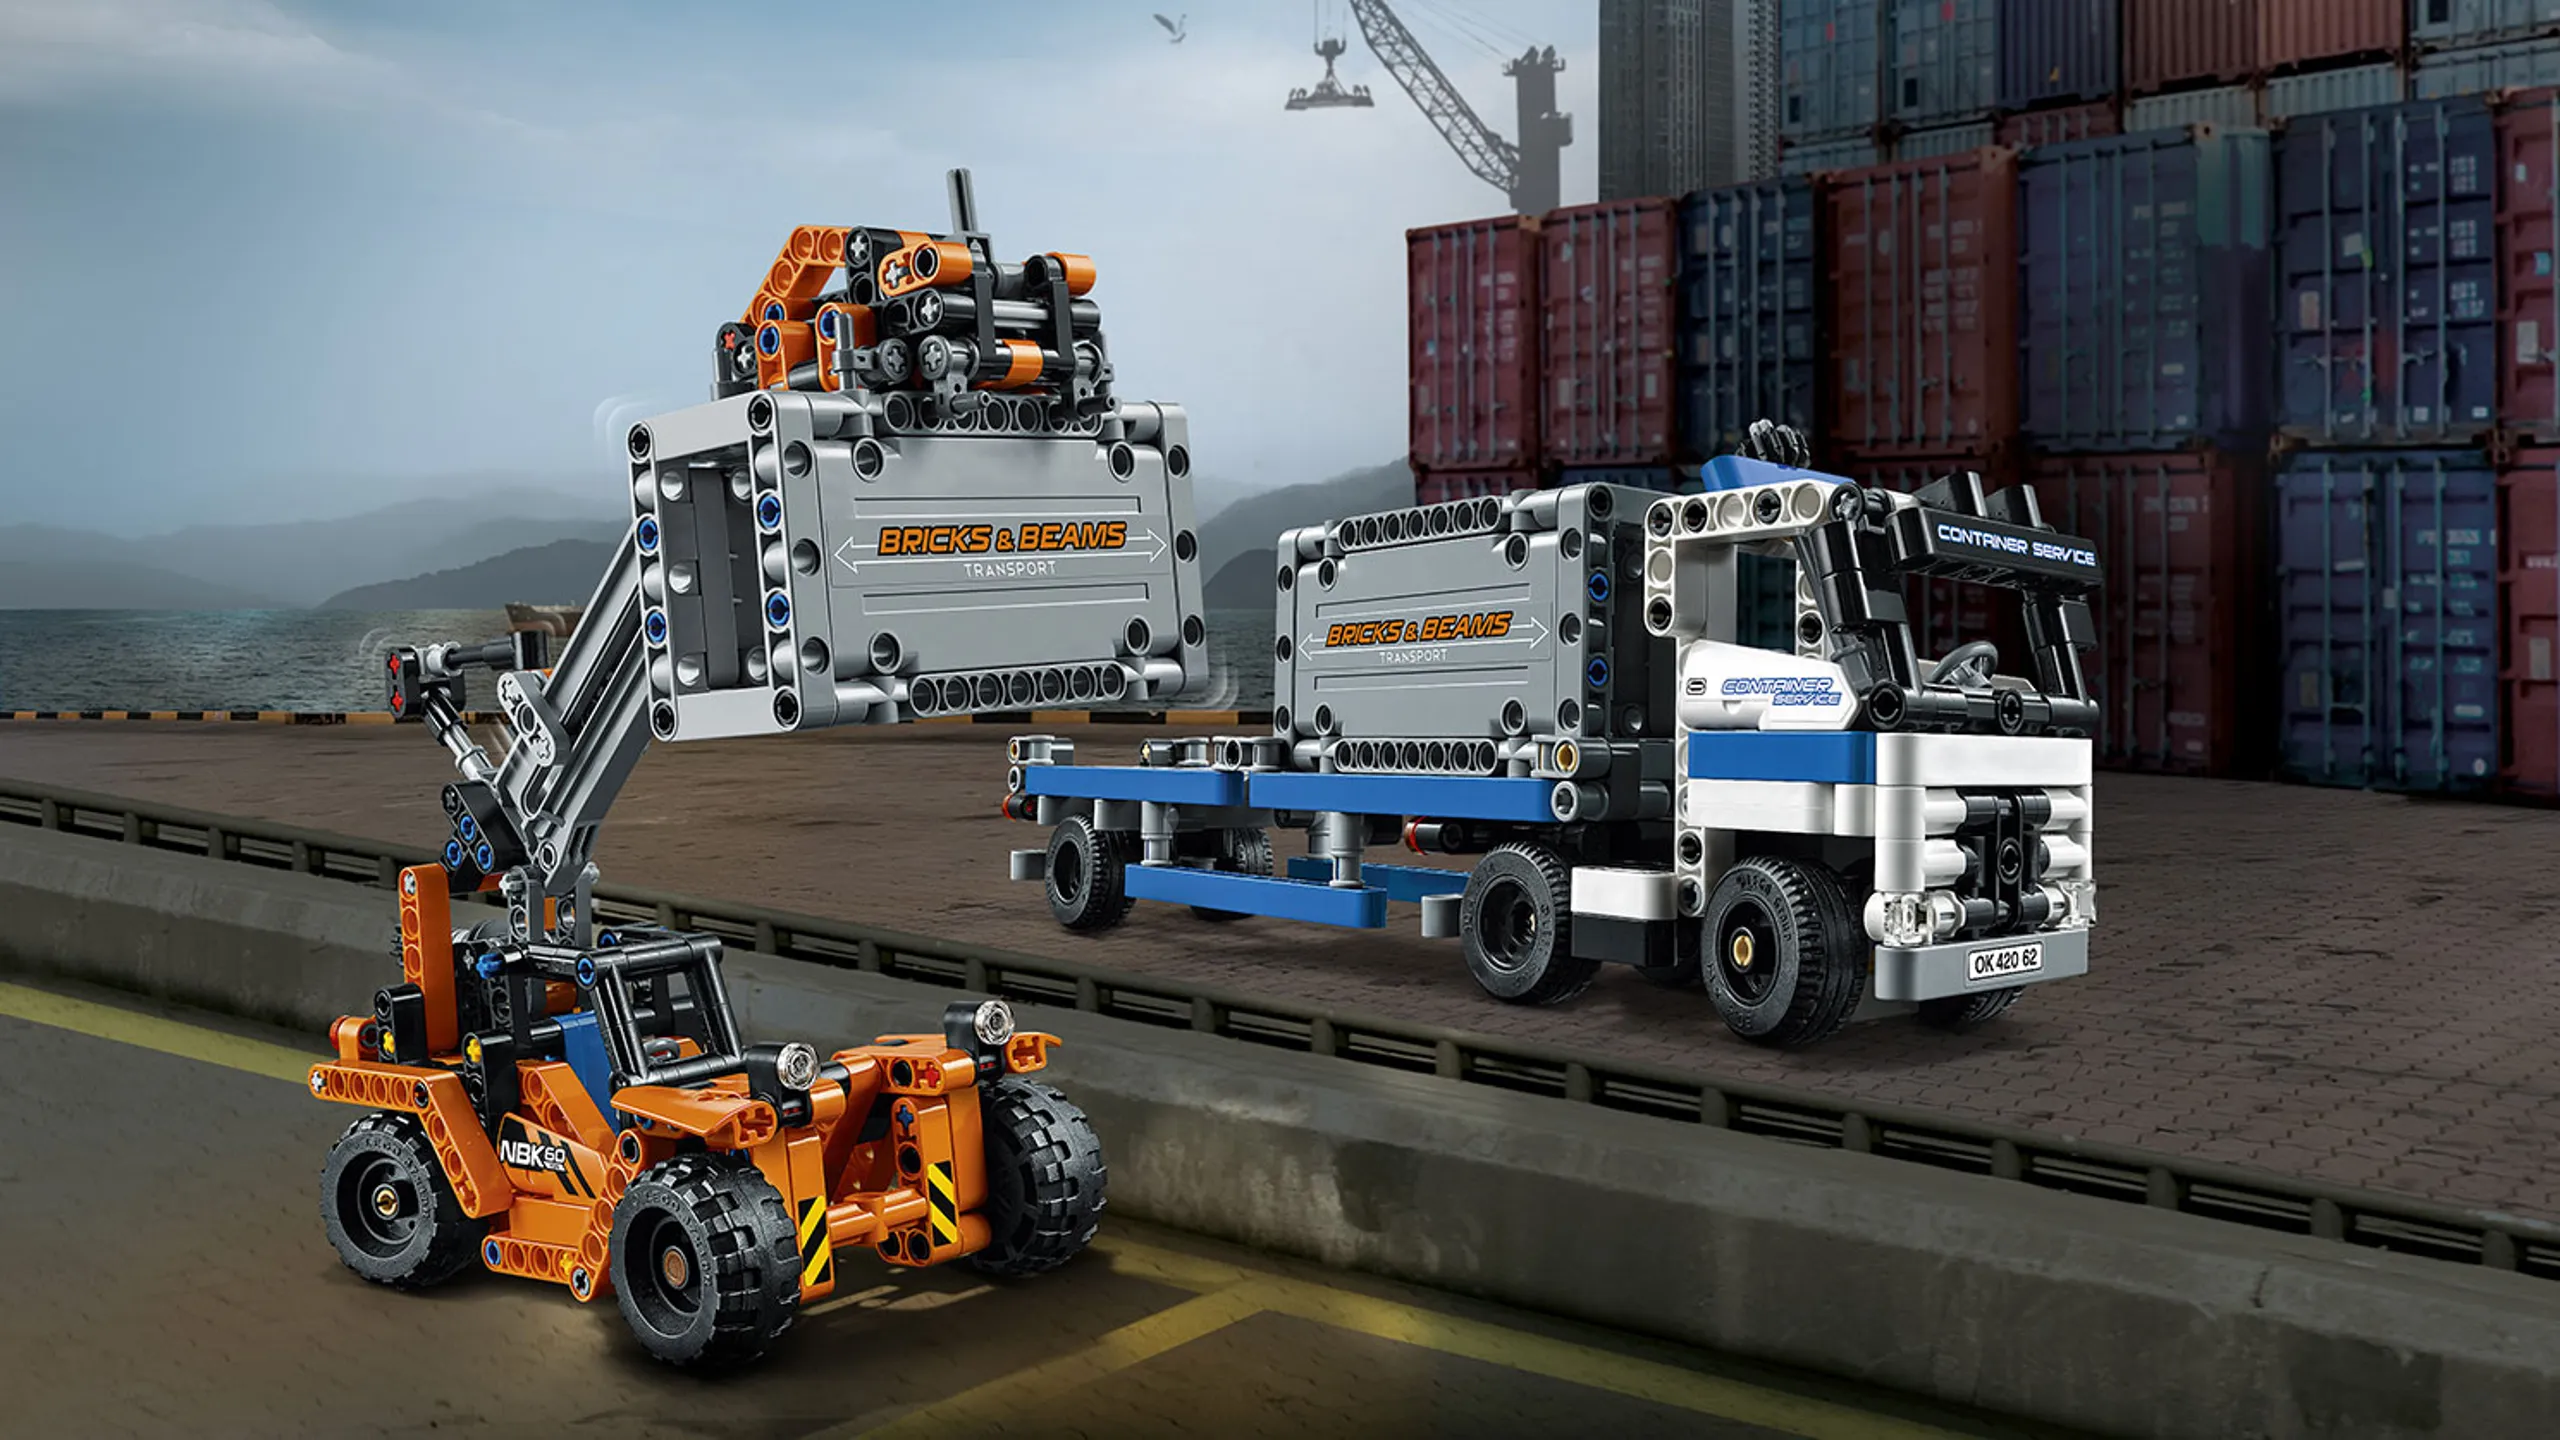 LEGO Technic - 42062 Container Yard - Transport huge amounts of cargo at the 2-in-1 LEGO® Technic Container Yard, featuring an articulated truck with detachable trailer and two large containers, plus a rugged container loader.